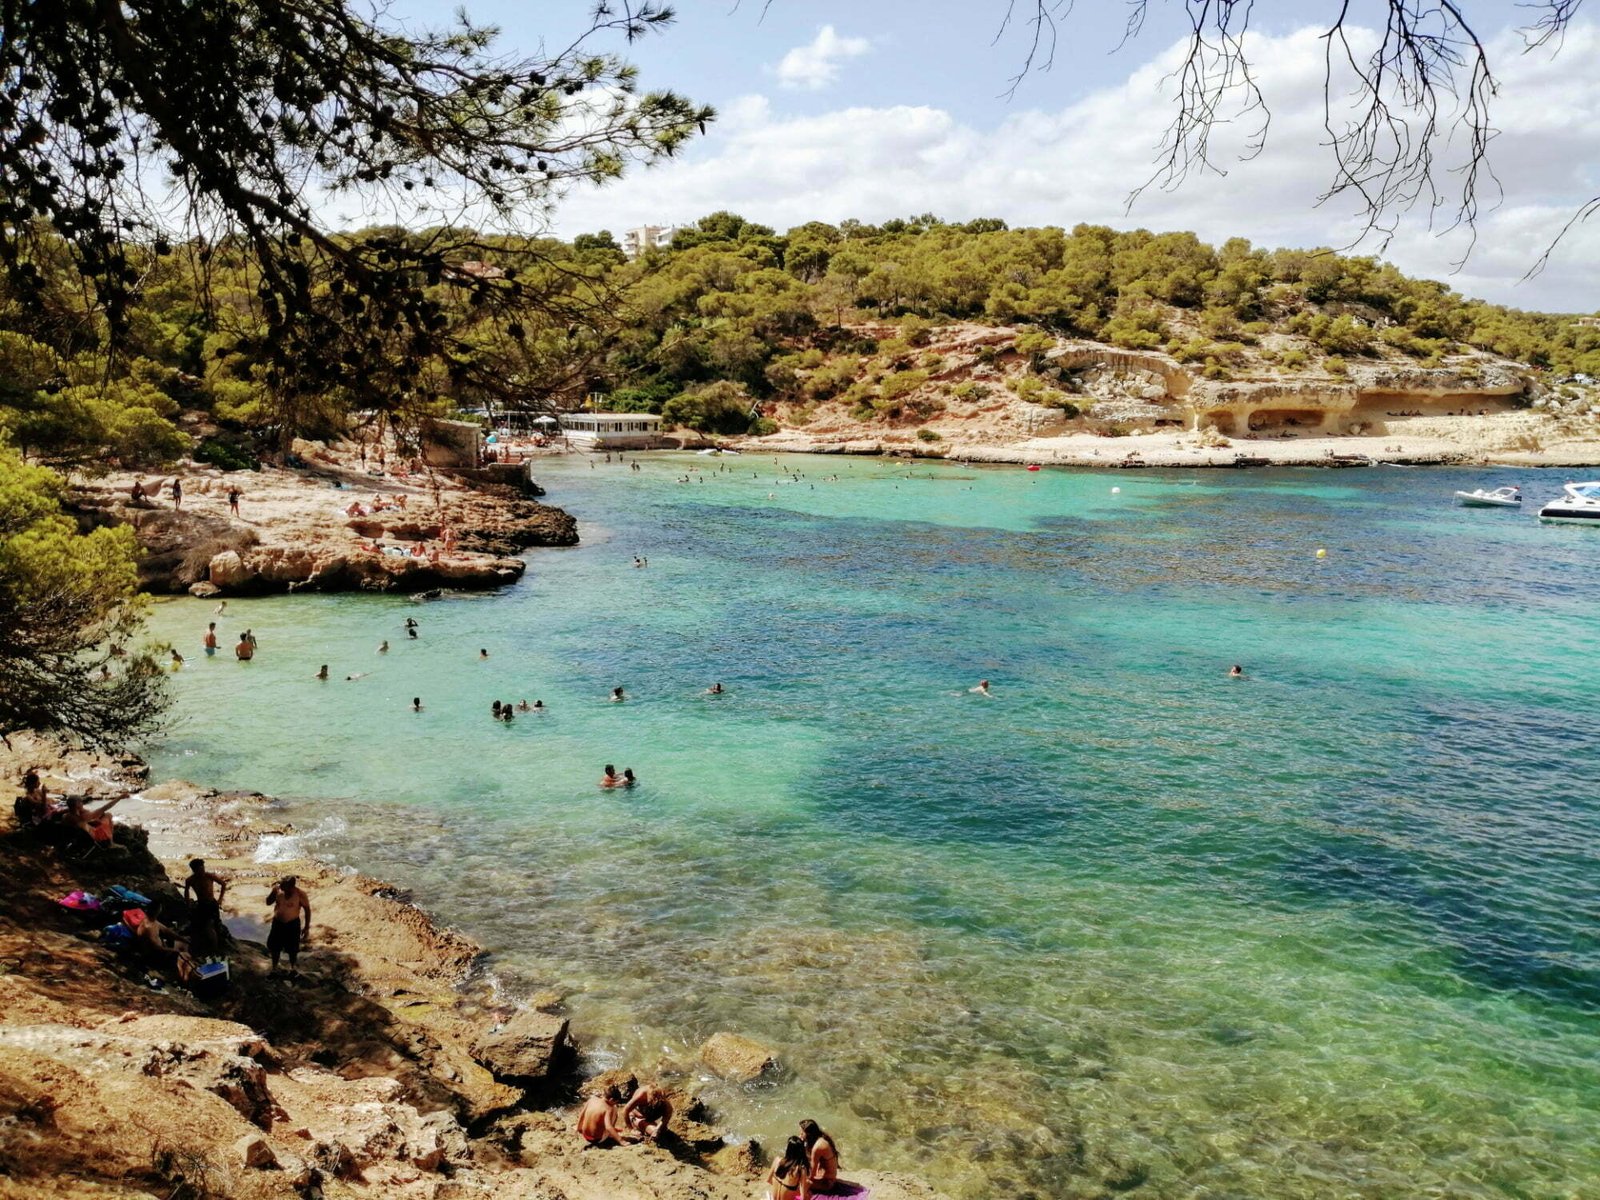 A sweeping scene of Playa del mago, a turquoise beach and golden roacks located in the southern tip near Palma, Mallorca